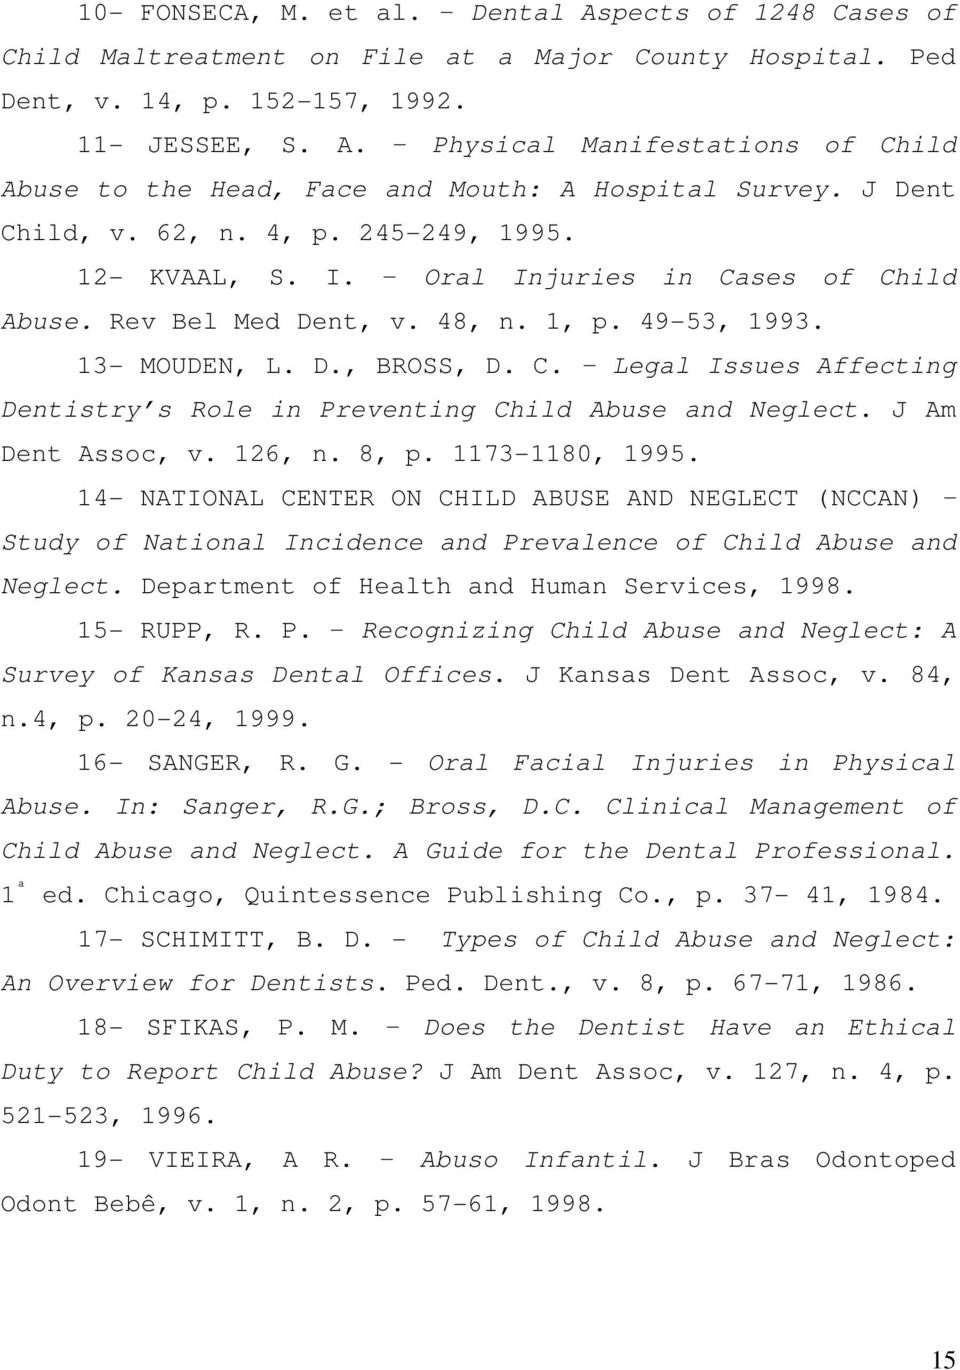 J Am Dent Assoc, v. 126, n. 8, p. 1173-1180, 1995. 14- NATIONAL CENTER ON CHILD ABUSE AND NEGLECT (NCCAN) Study of National Incidence and Prevalence of Child Abuse and Neglect.